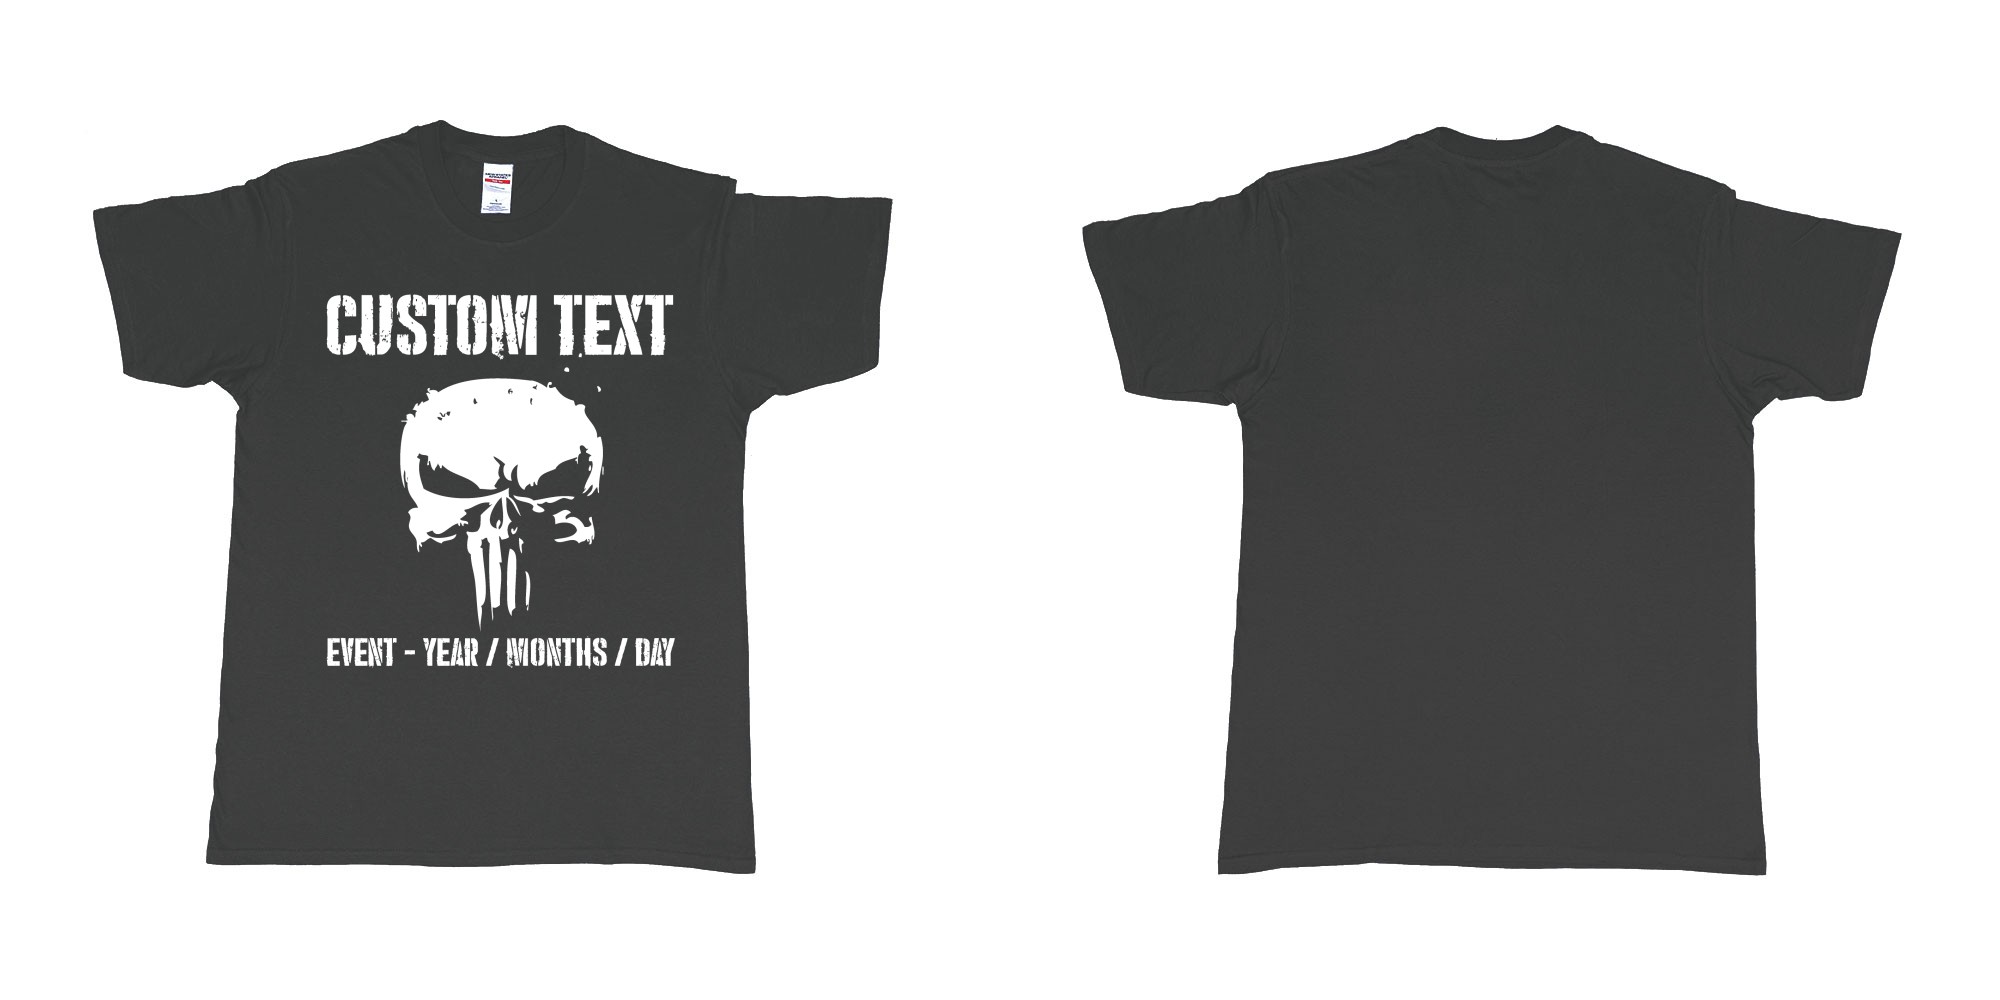 Custom tshirt design the punisher scull logo custom text in fabric color black choice your own text made in Bali by The Pirate Way